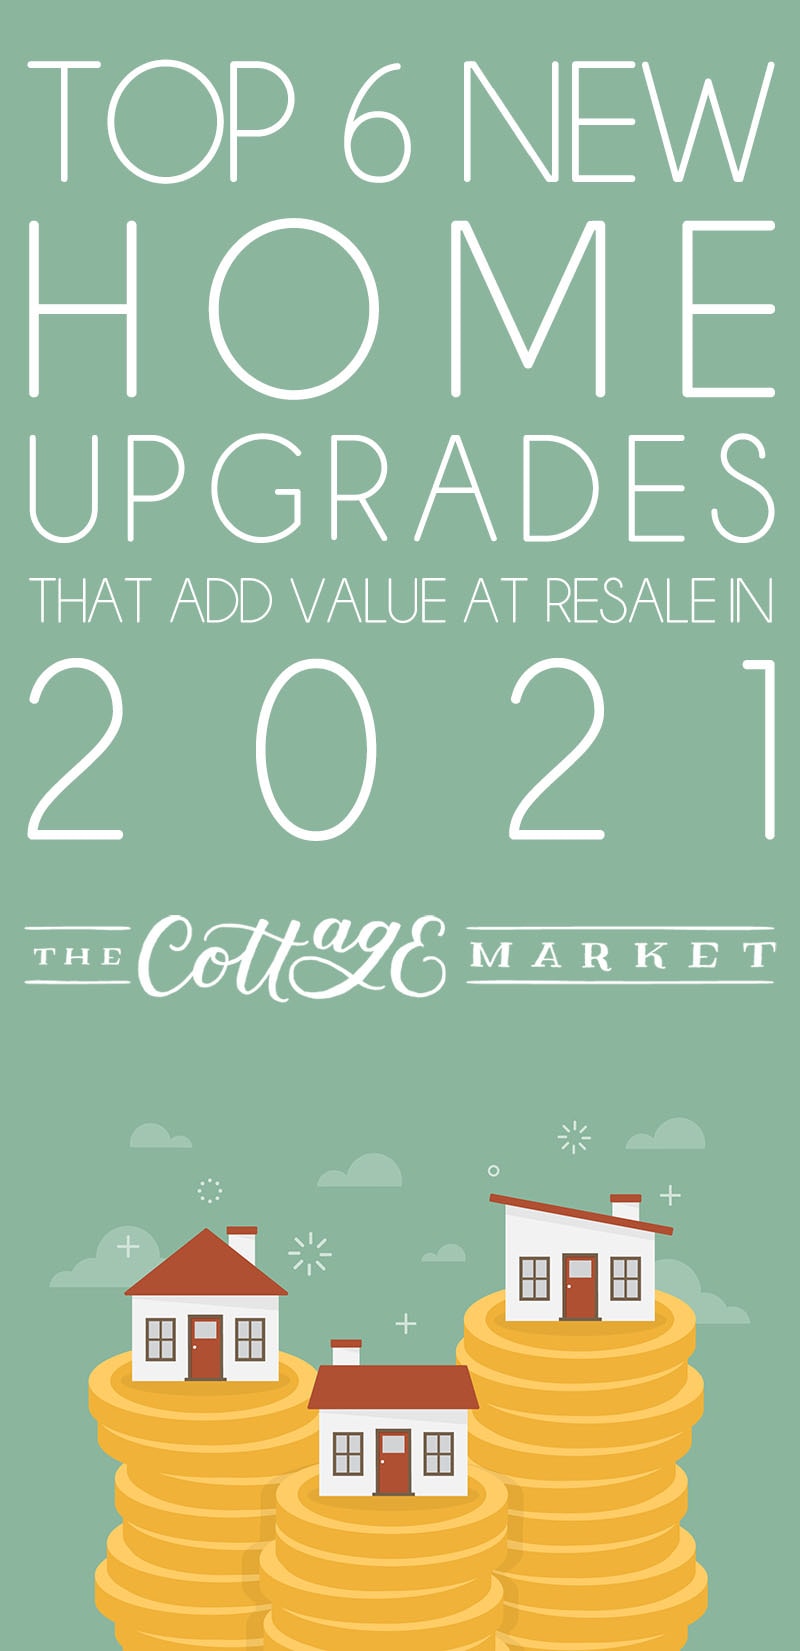 If you are looking to add value to your home, you will really enjoy these Top 6 New Home Upgrades That Add Value At Resale in 20201!